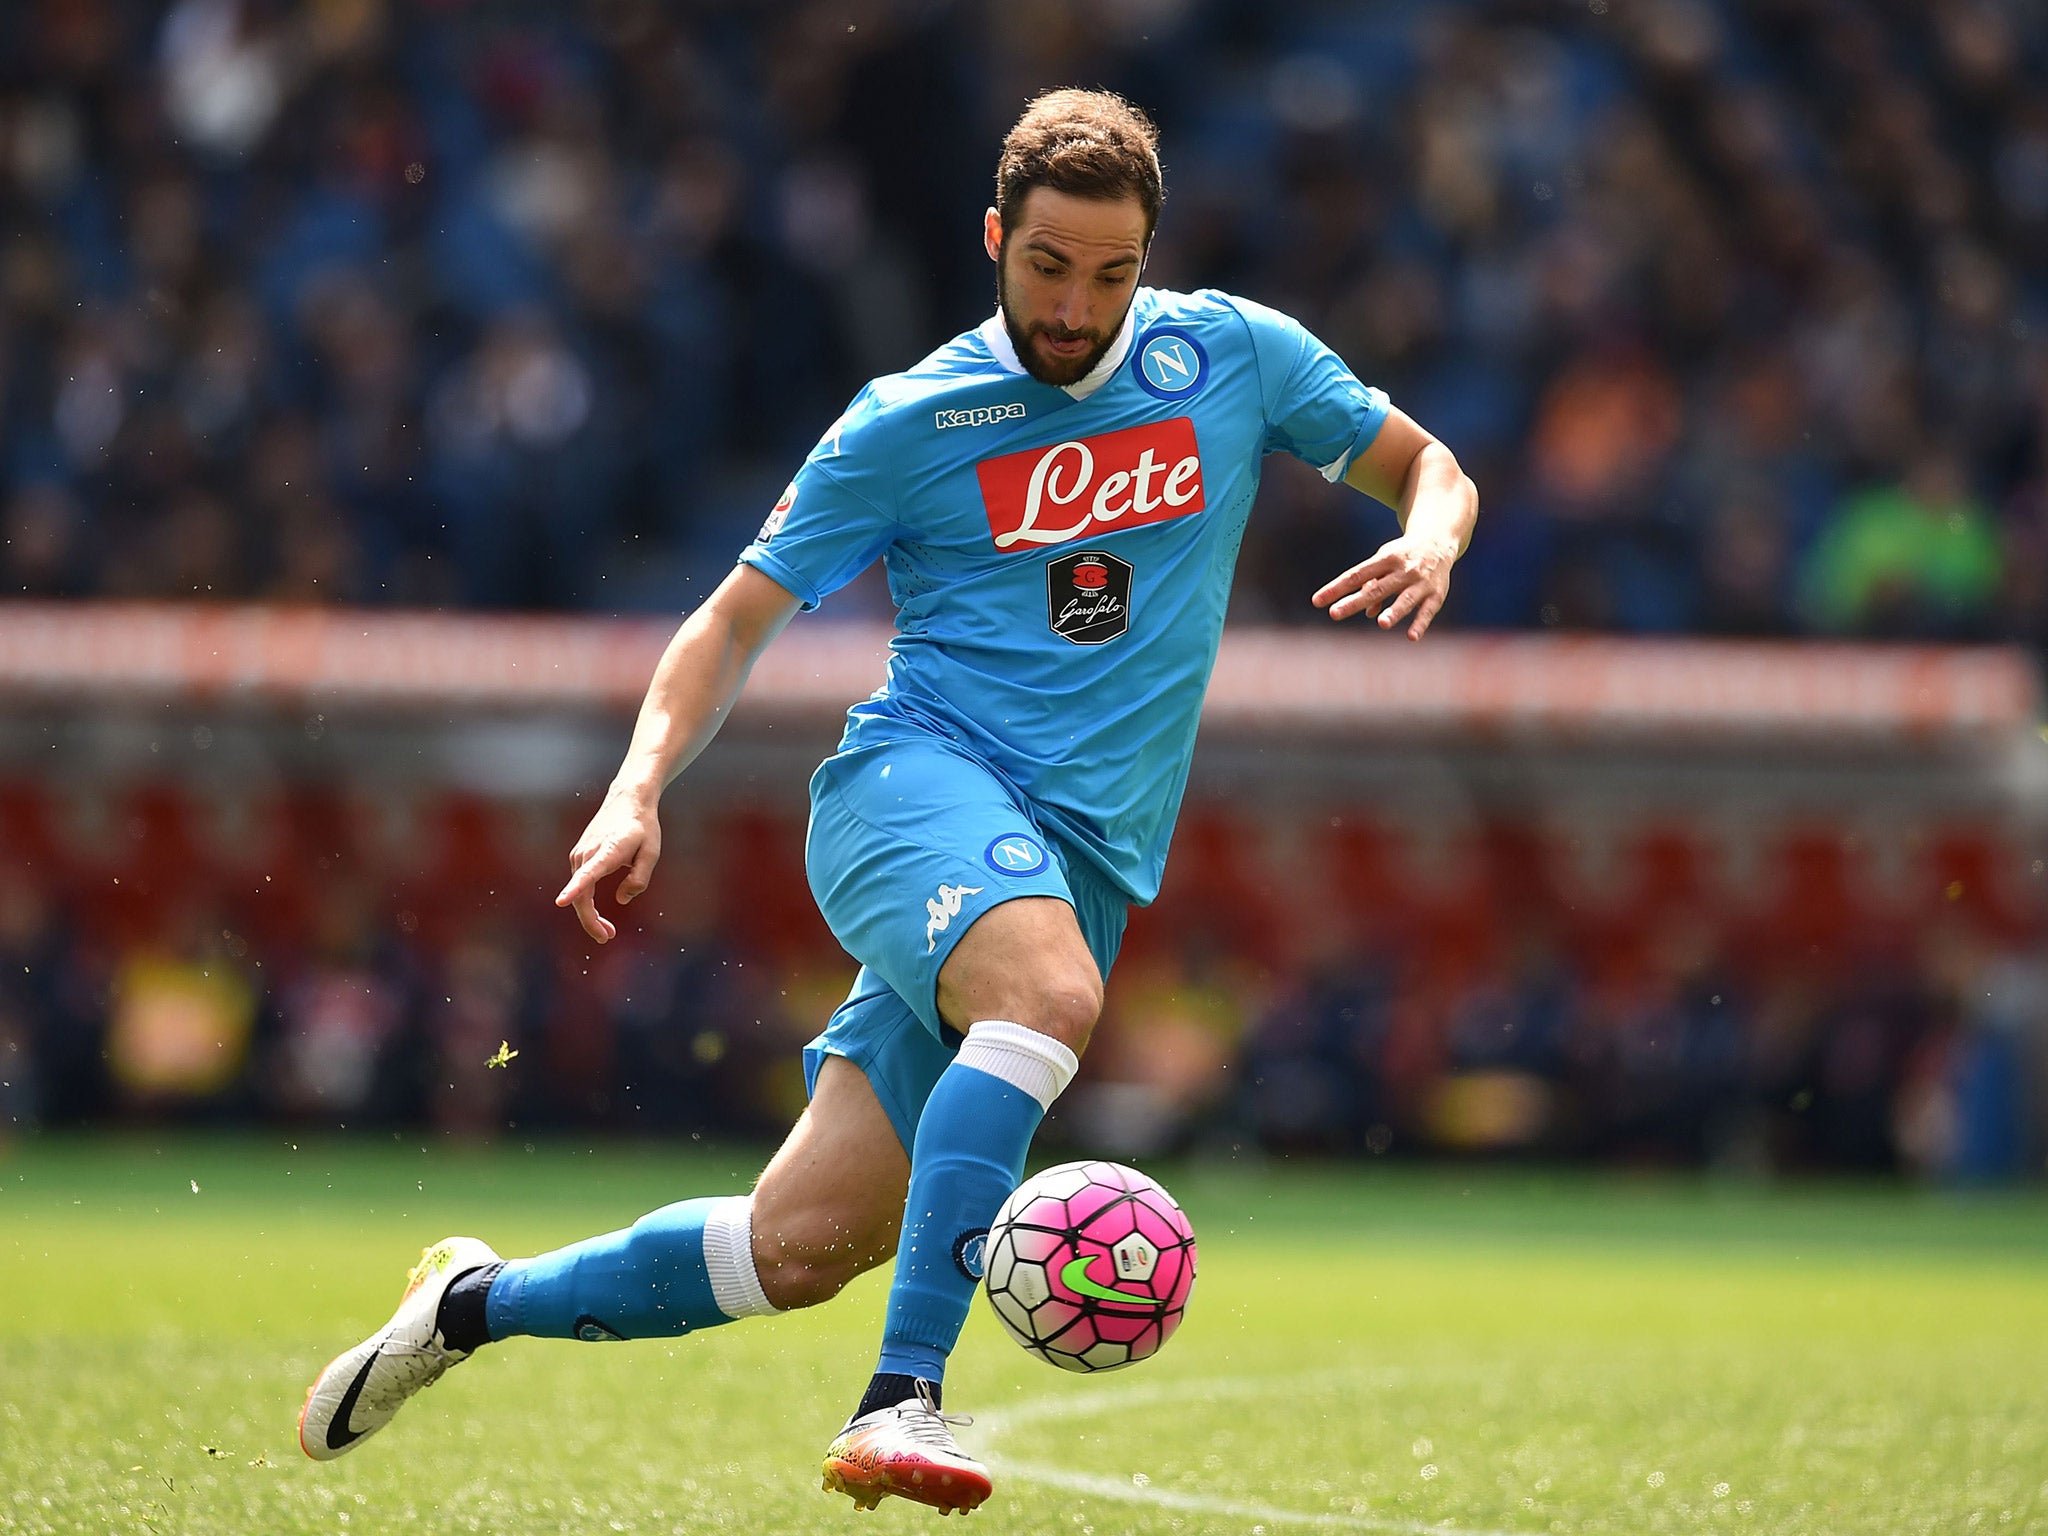 Diego Maradona believes Napoli will sell Gonzalo Higuain in the summer